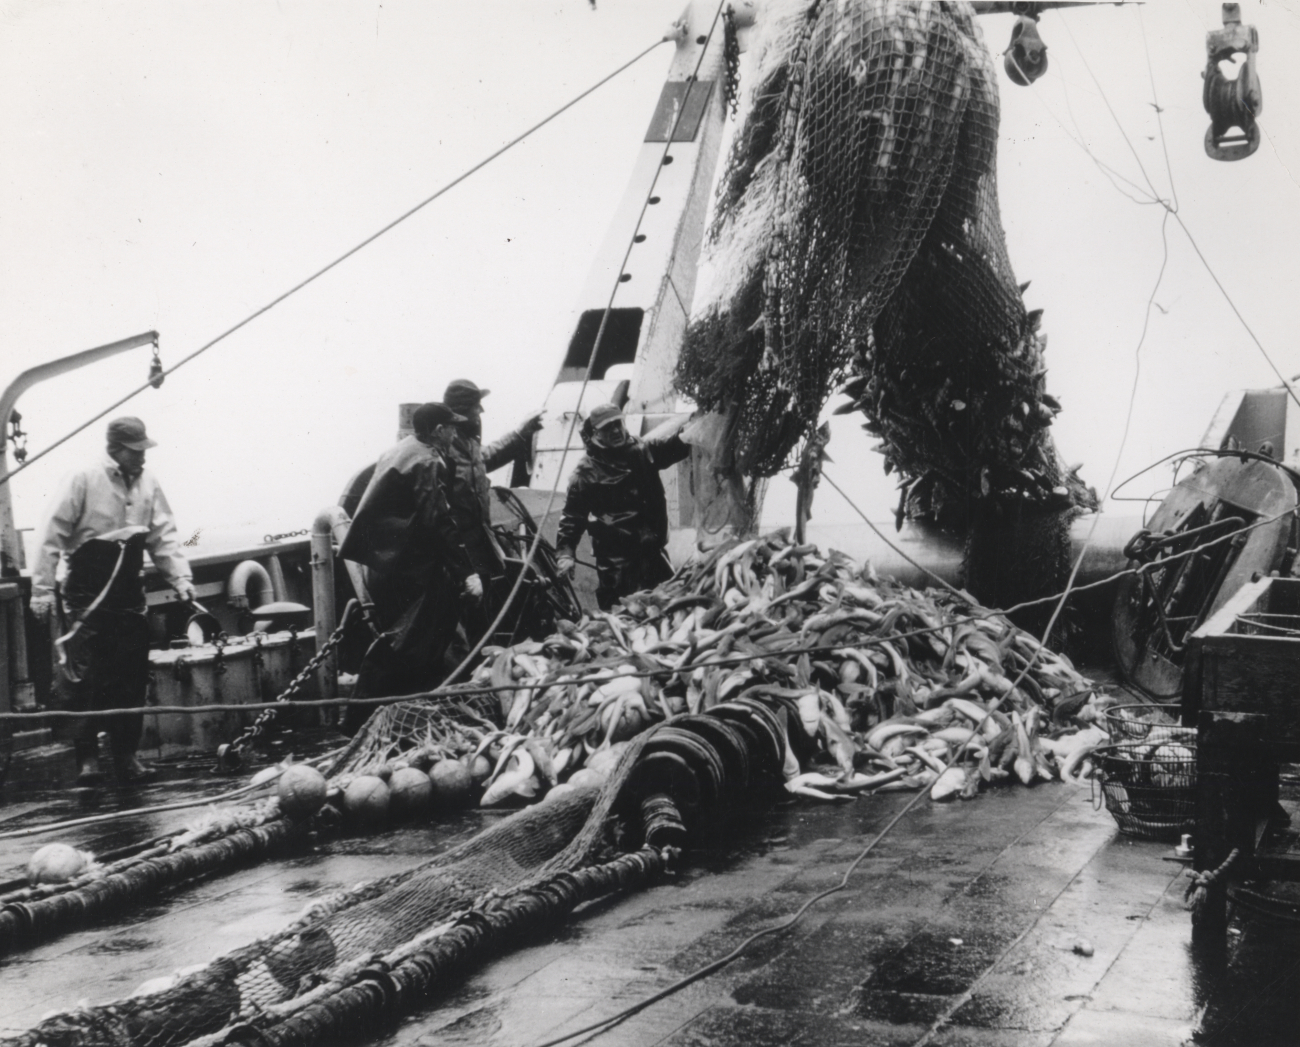 A small portion of a record catch of dogfish taken by the ALBATROSS IV in100 fathoms of water south of Nantucket